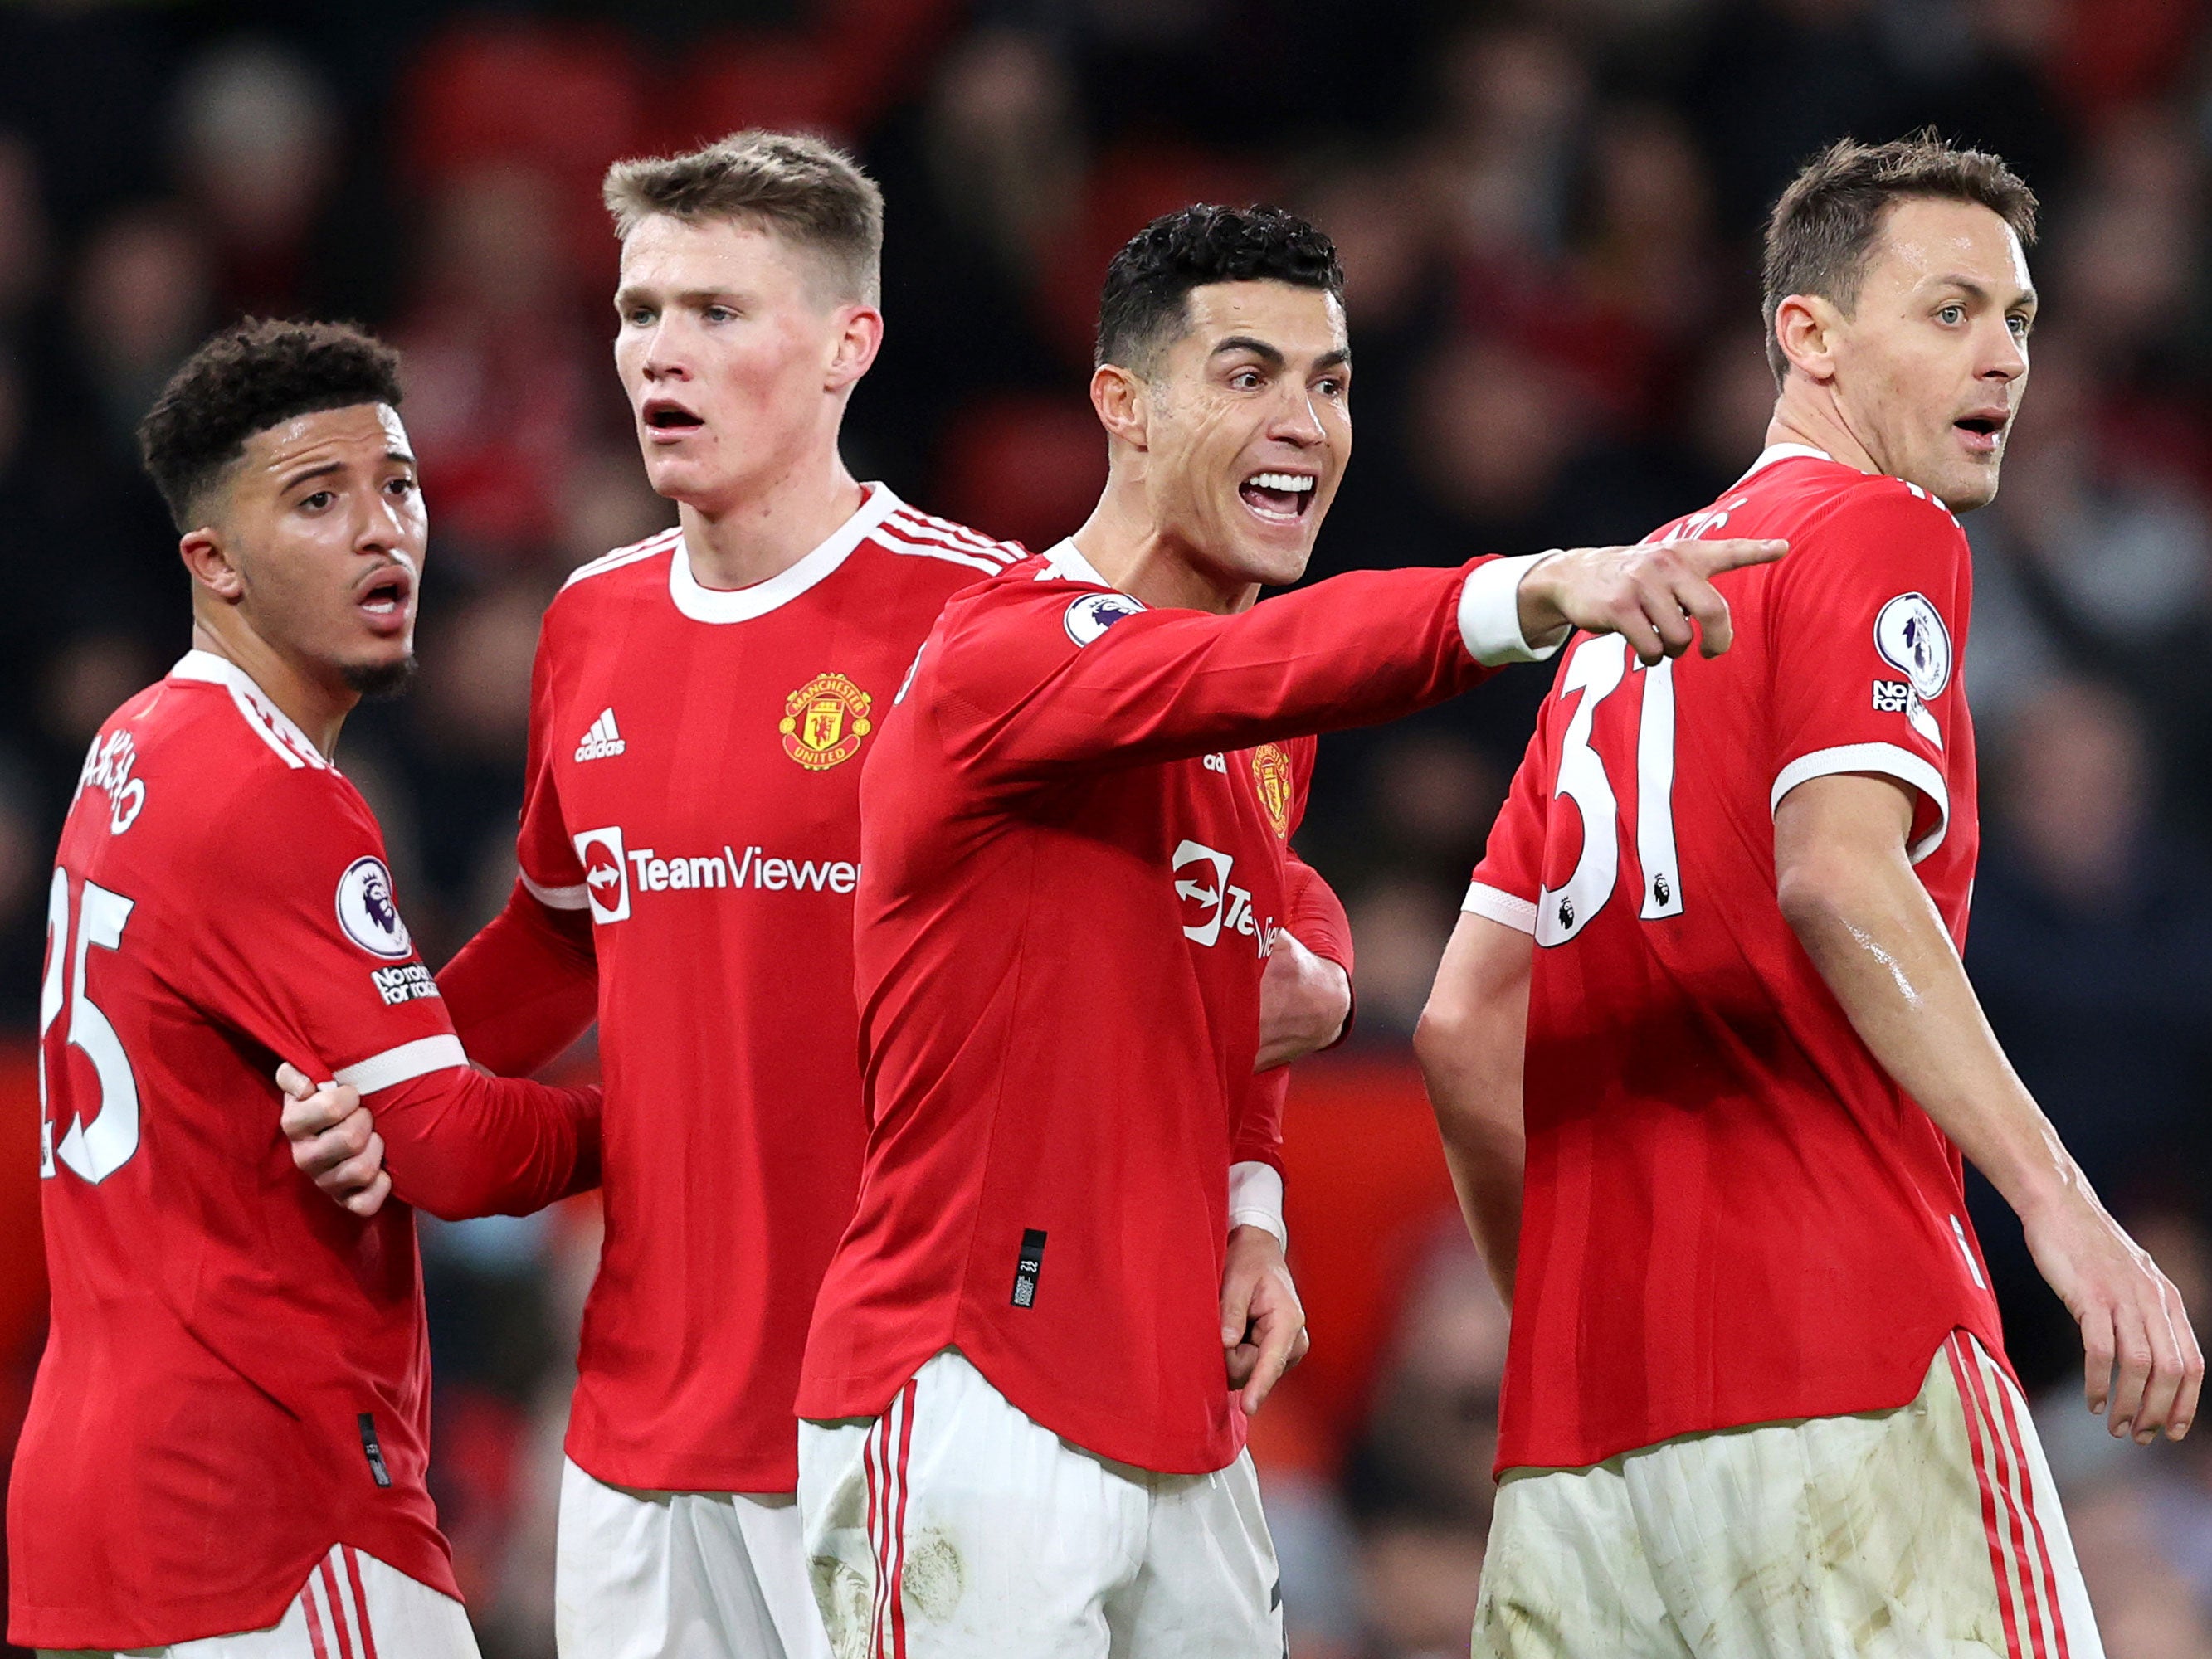 Manchester United are at the back of a four-horse race to qualify for the Champions League